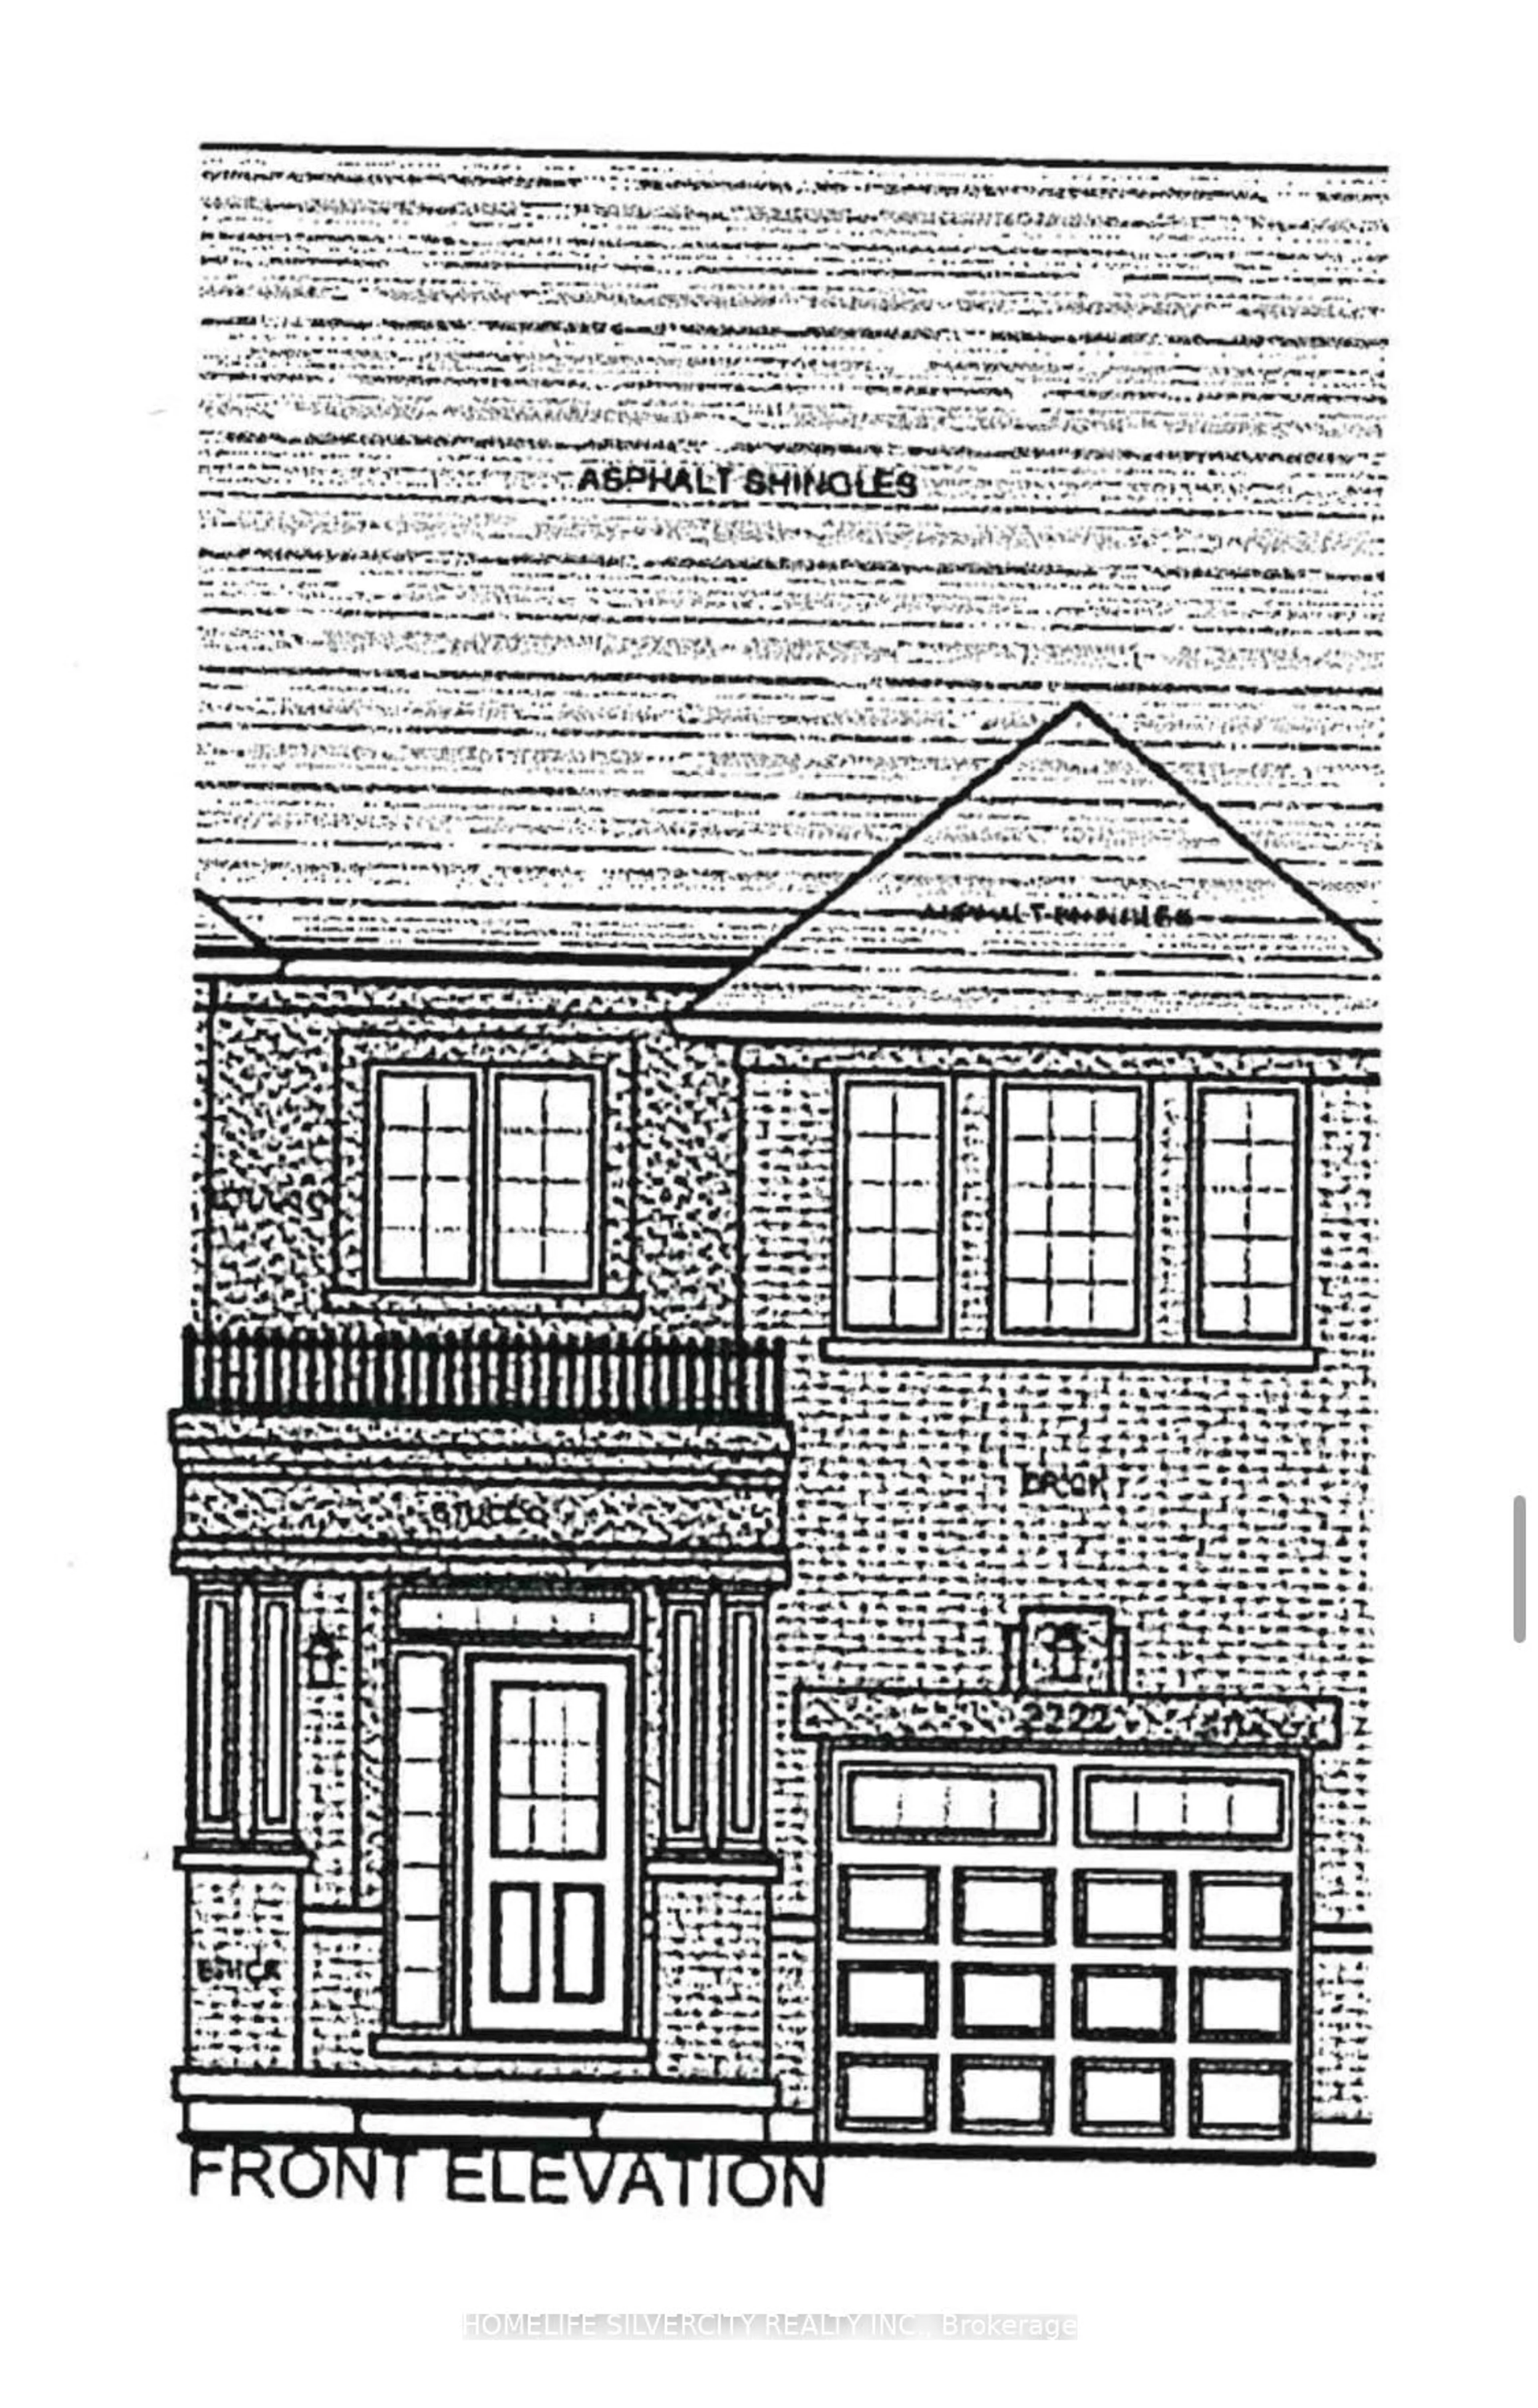 Home with brick exterior material for 620 Colborne St #Unit 2, Brantford Ontario N3T 5L5